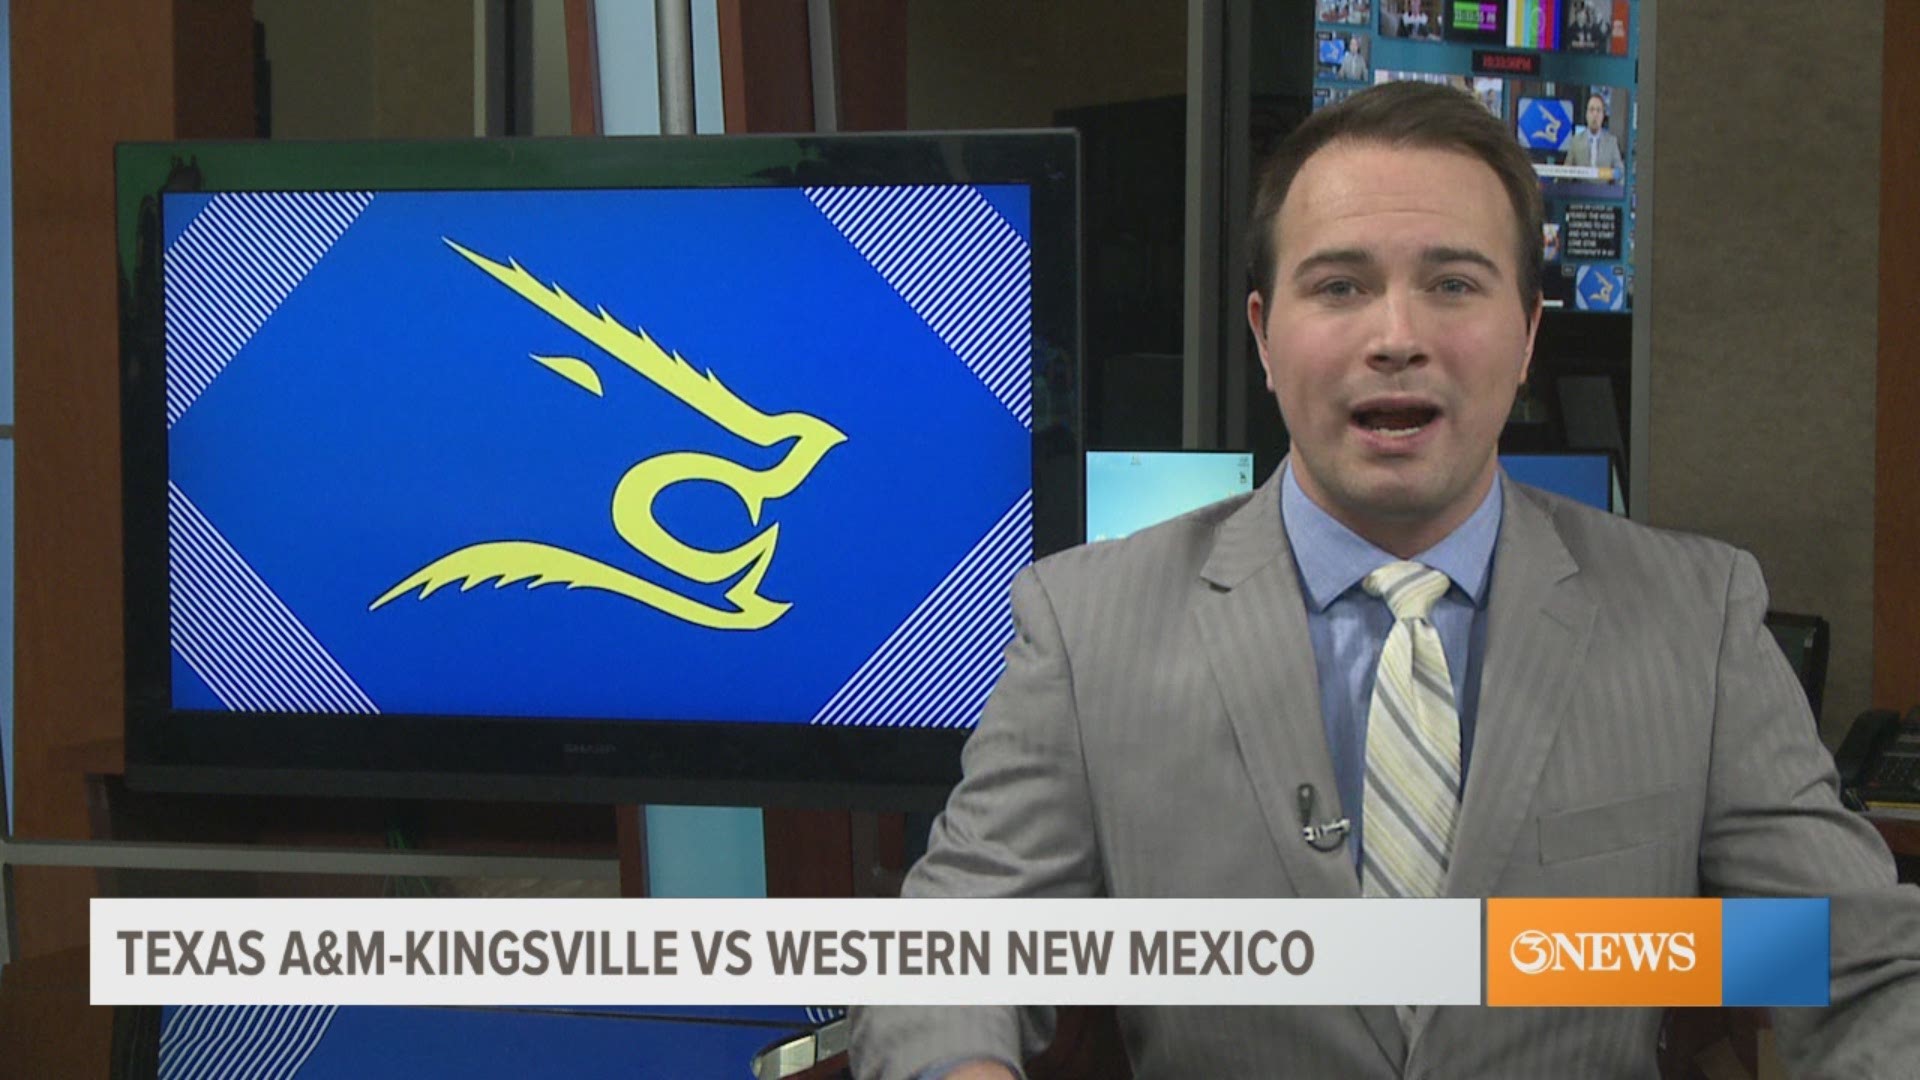 Texas A&M-Kingsville topped Western New Mexico 81-75 to improve to 5-0 in conference play for the first time since the 1995-96 season.